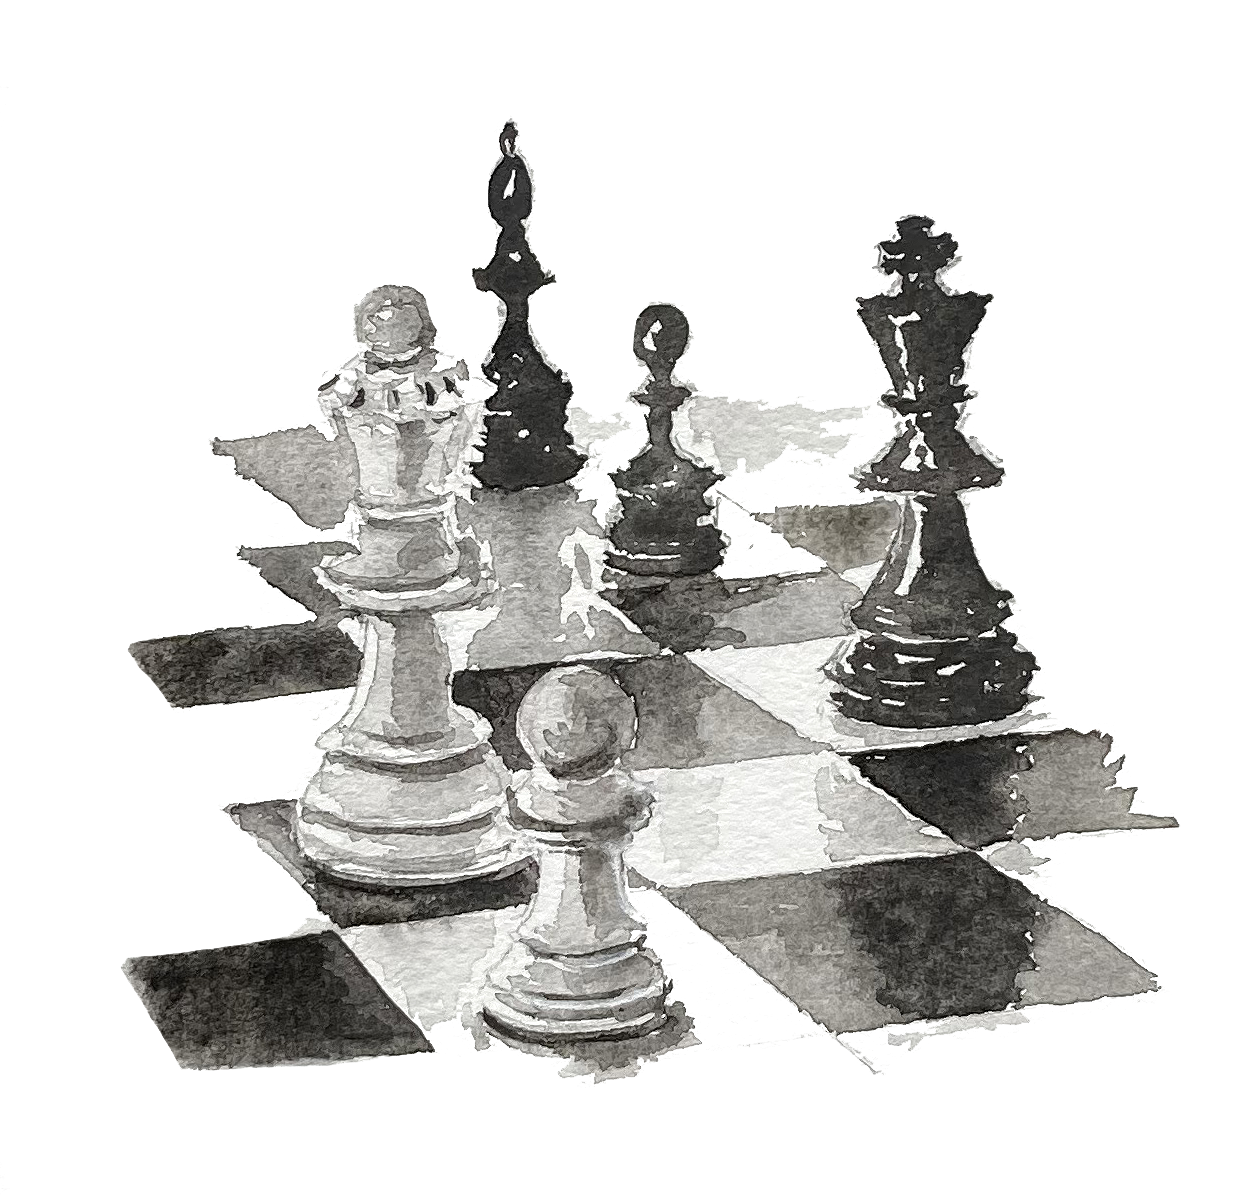 chess2.png